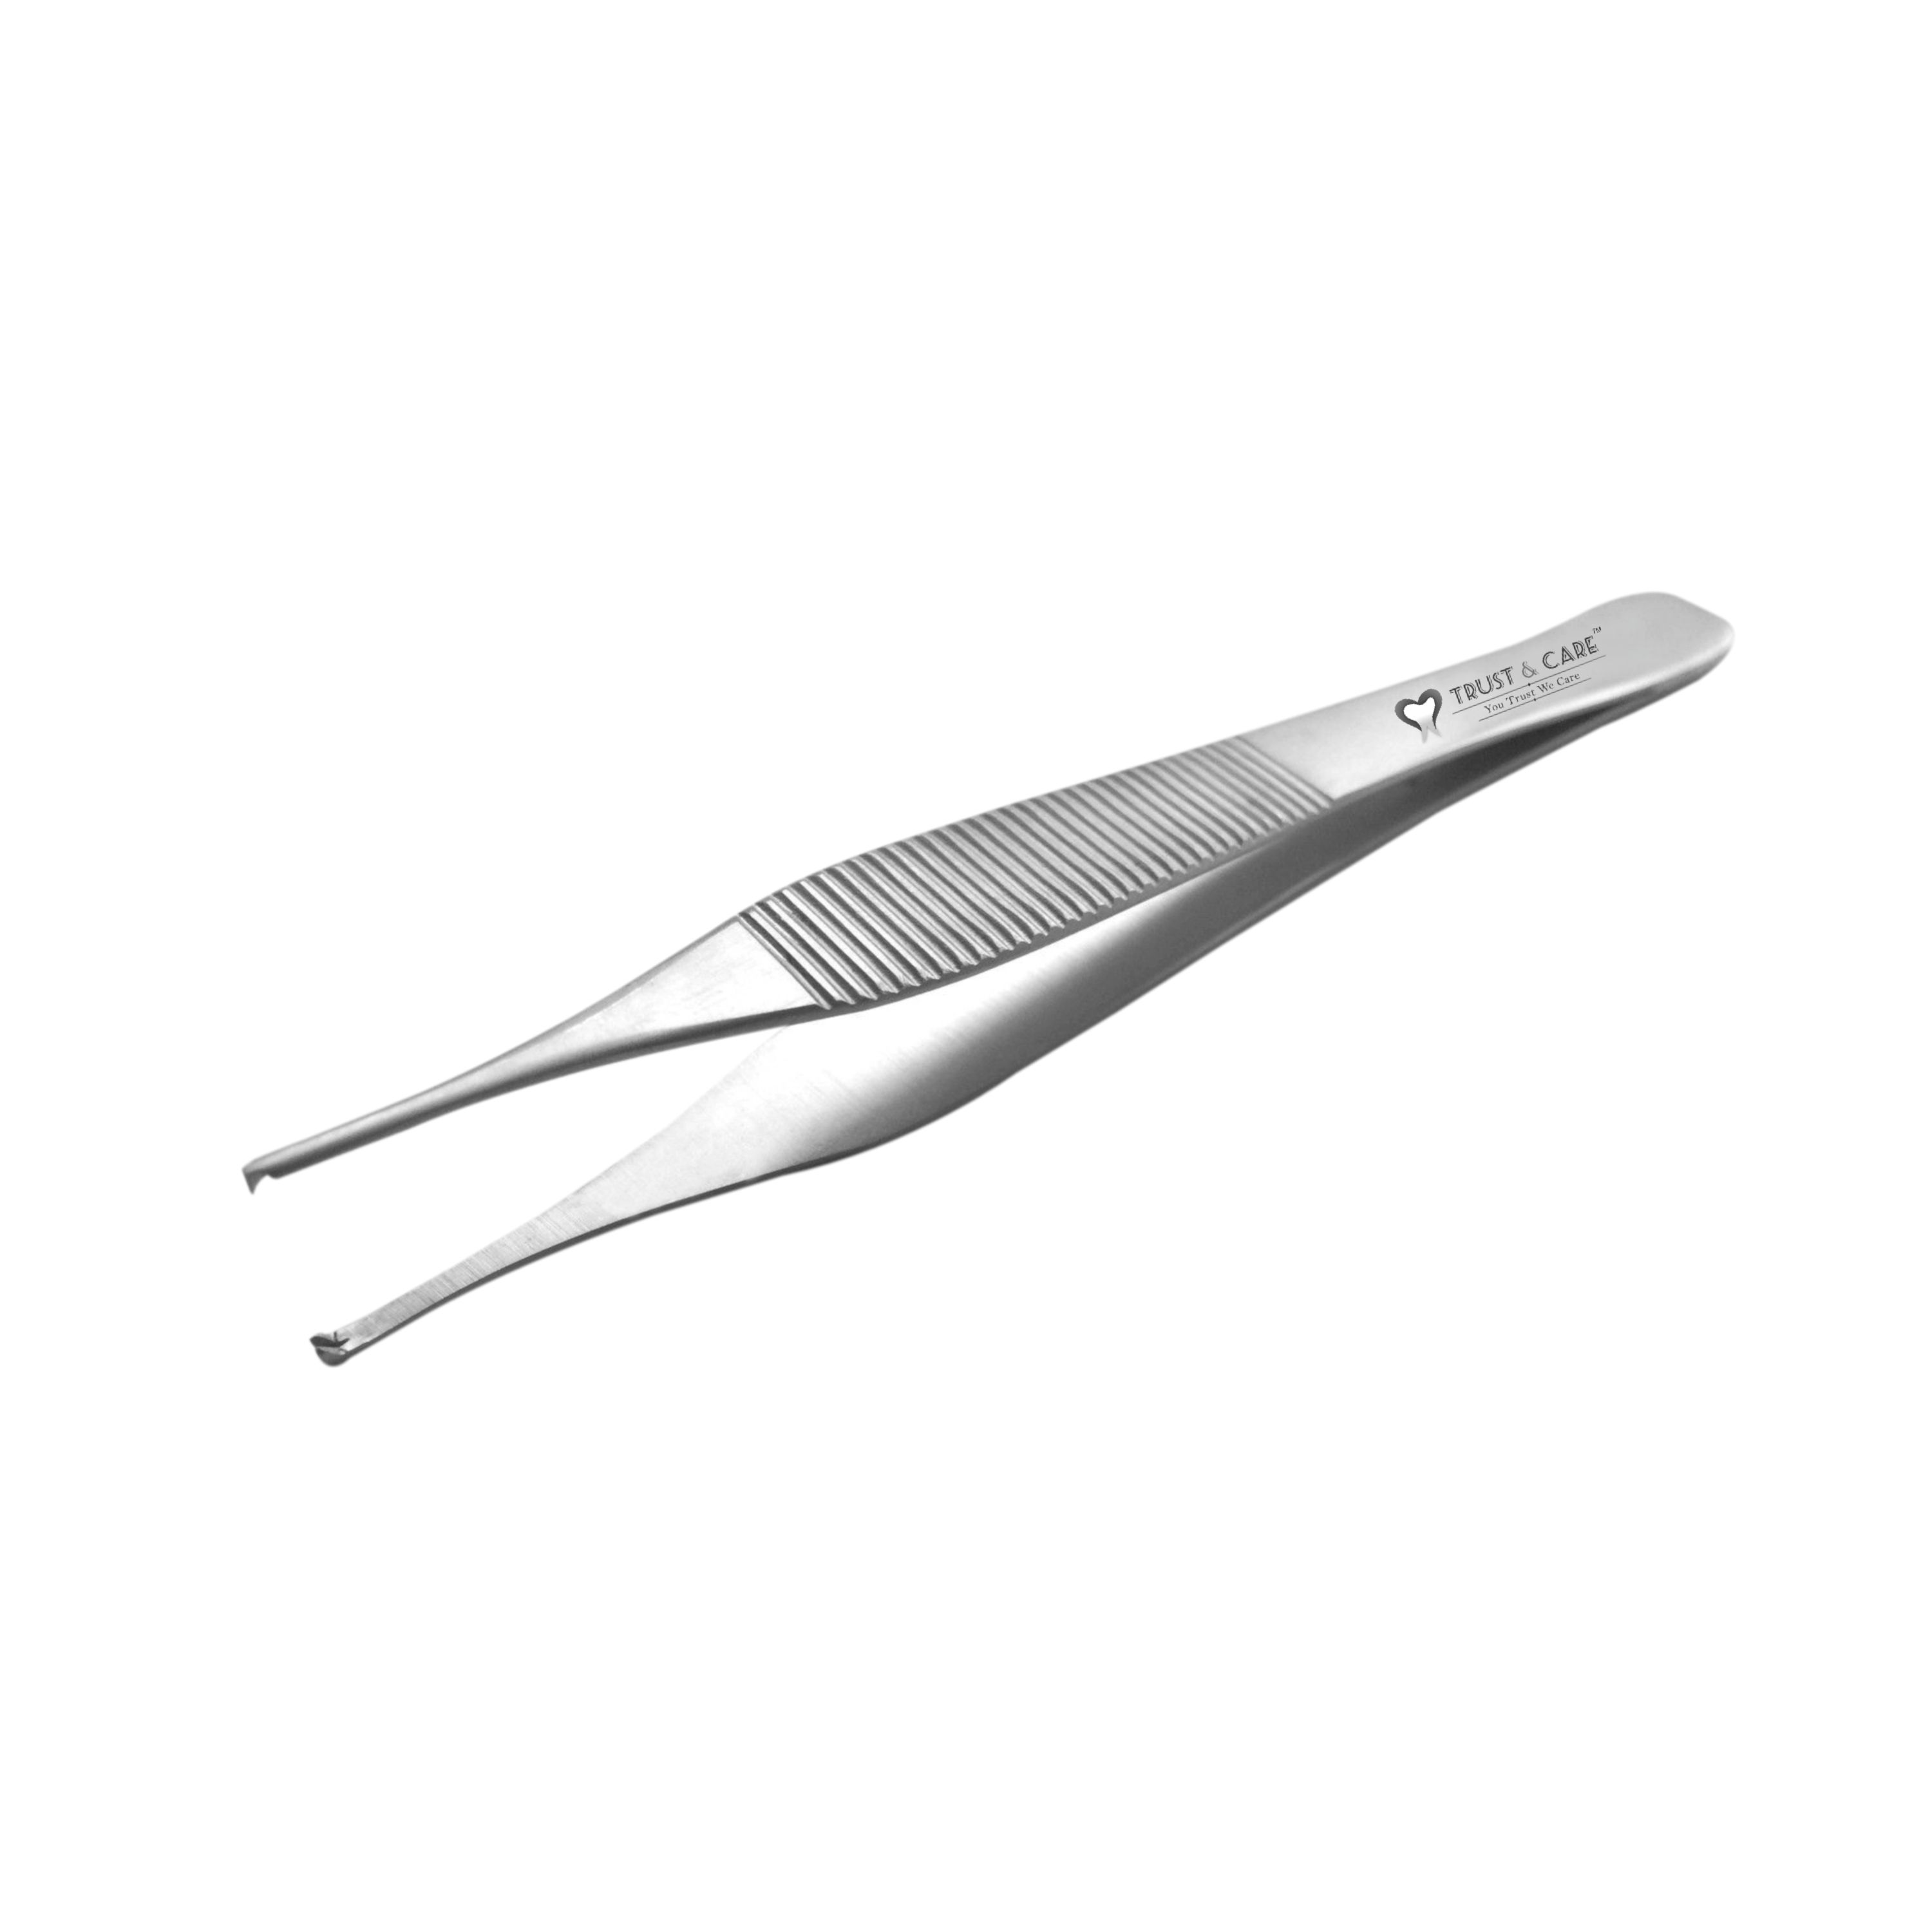 Trust & Care Tissue Adson Forcep With Tooth Large